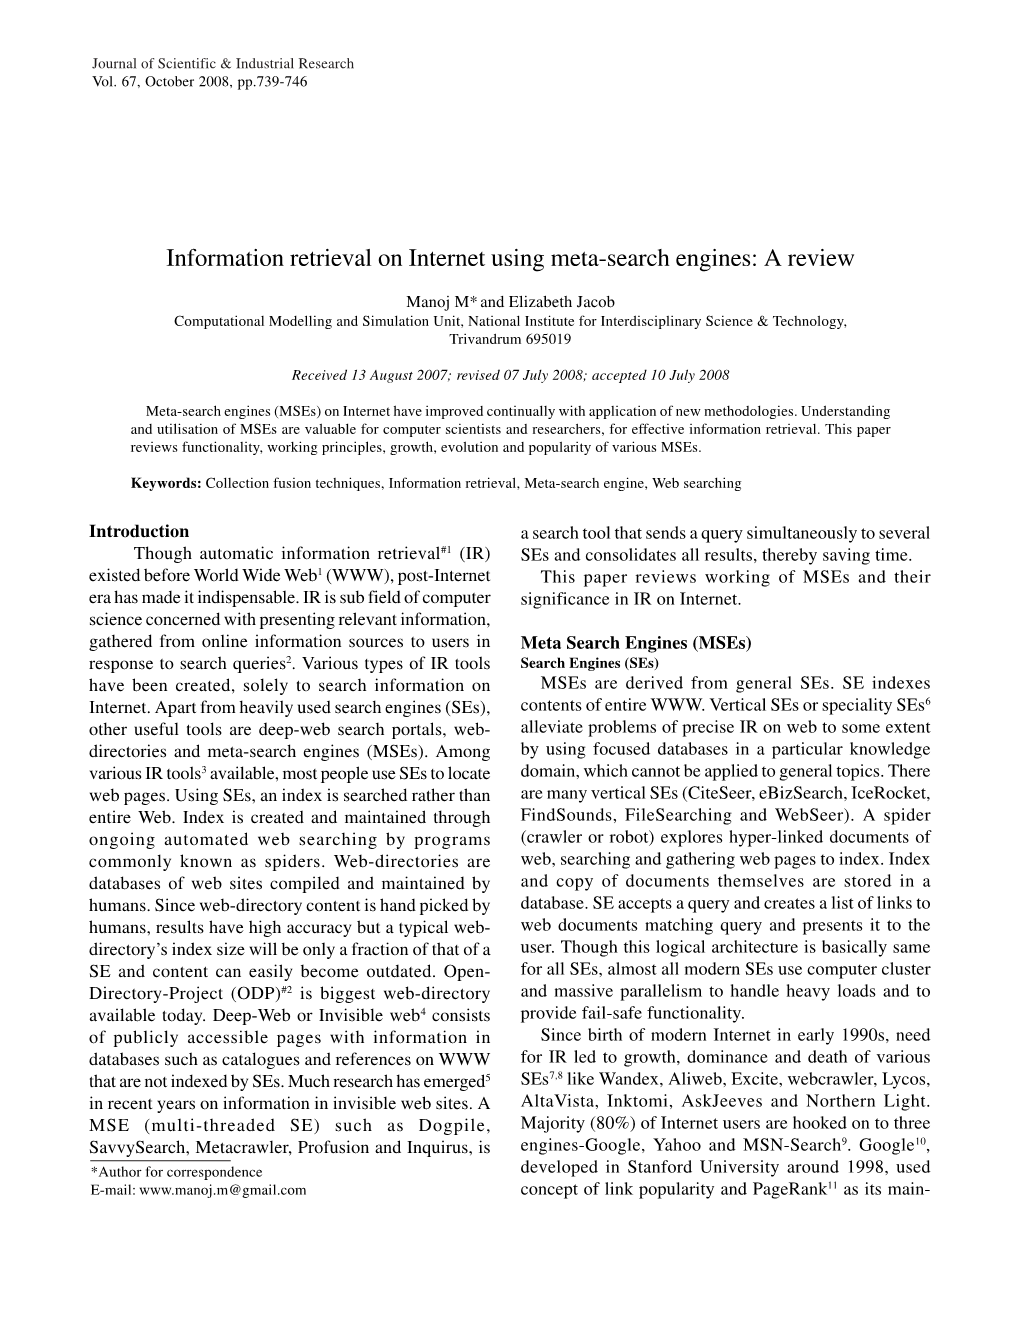 INFORMATION RETRIEVAL on INTERNET USING META-SEARCH ENGINES: a REVIEW Vol